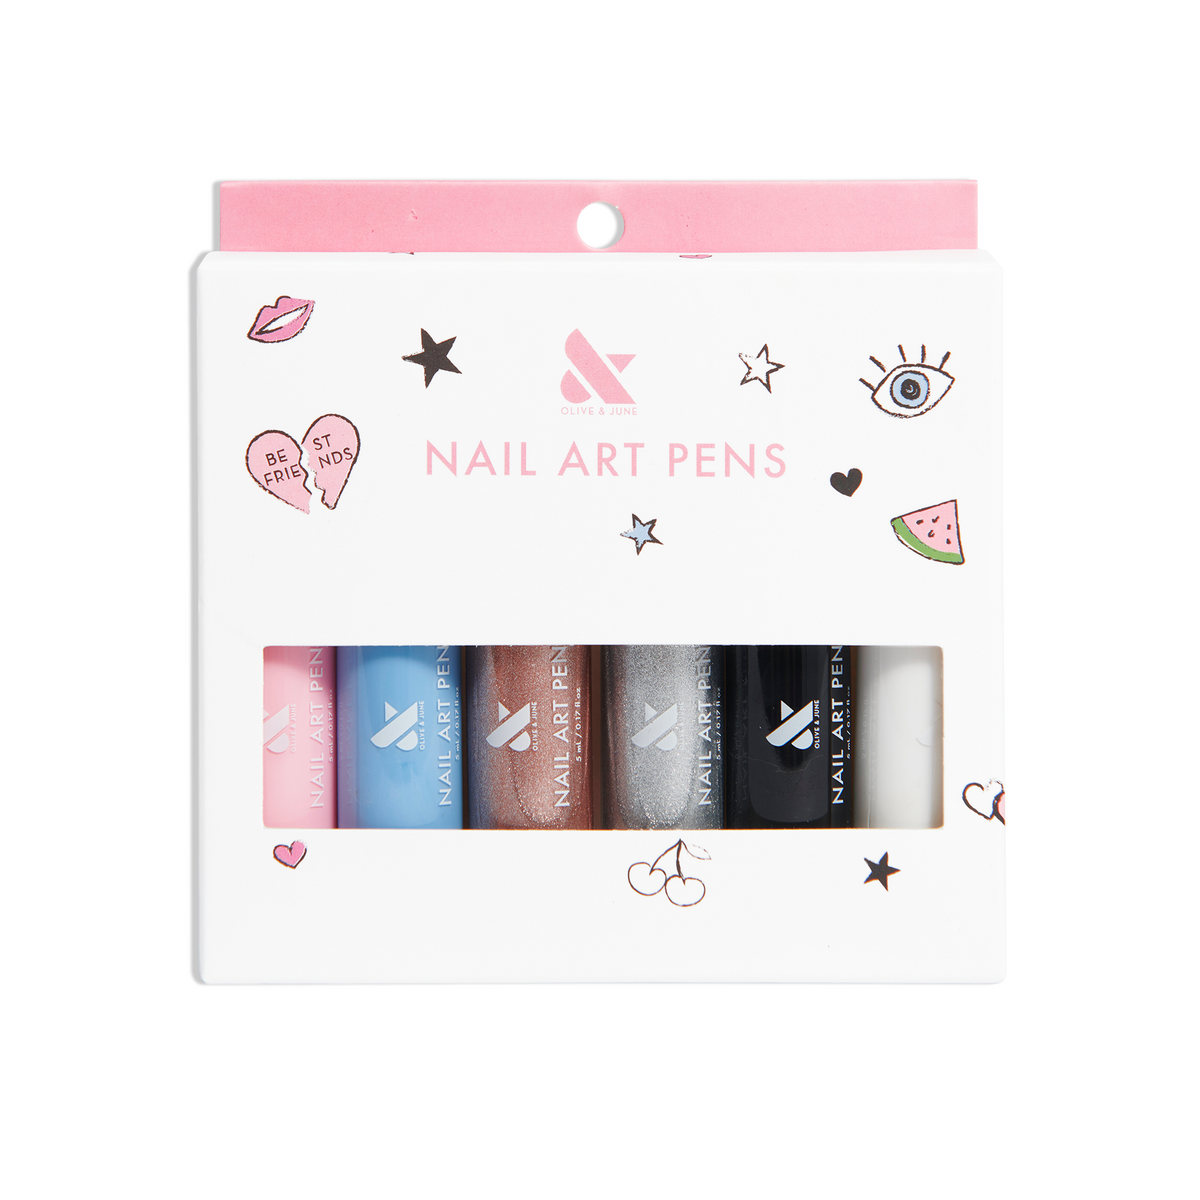 You must try out these nail art pens! Now available in all 4